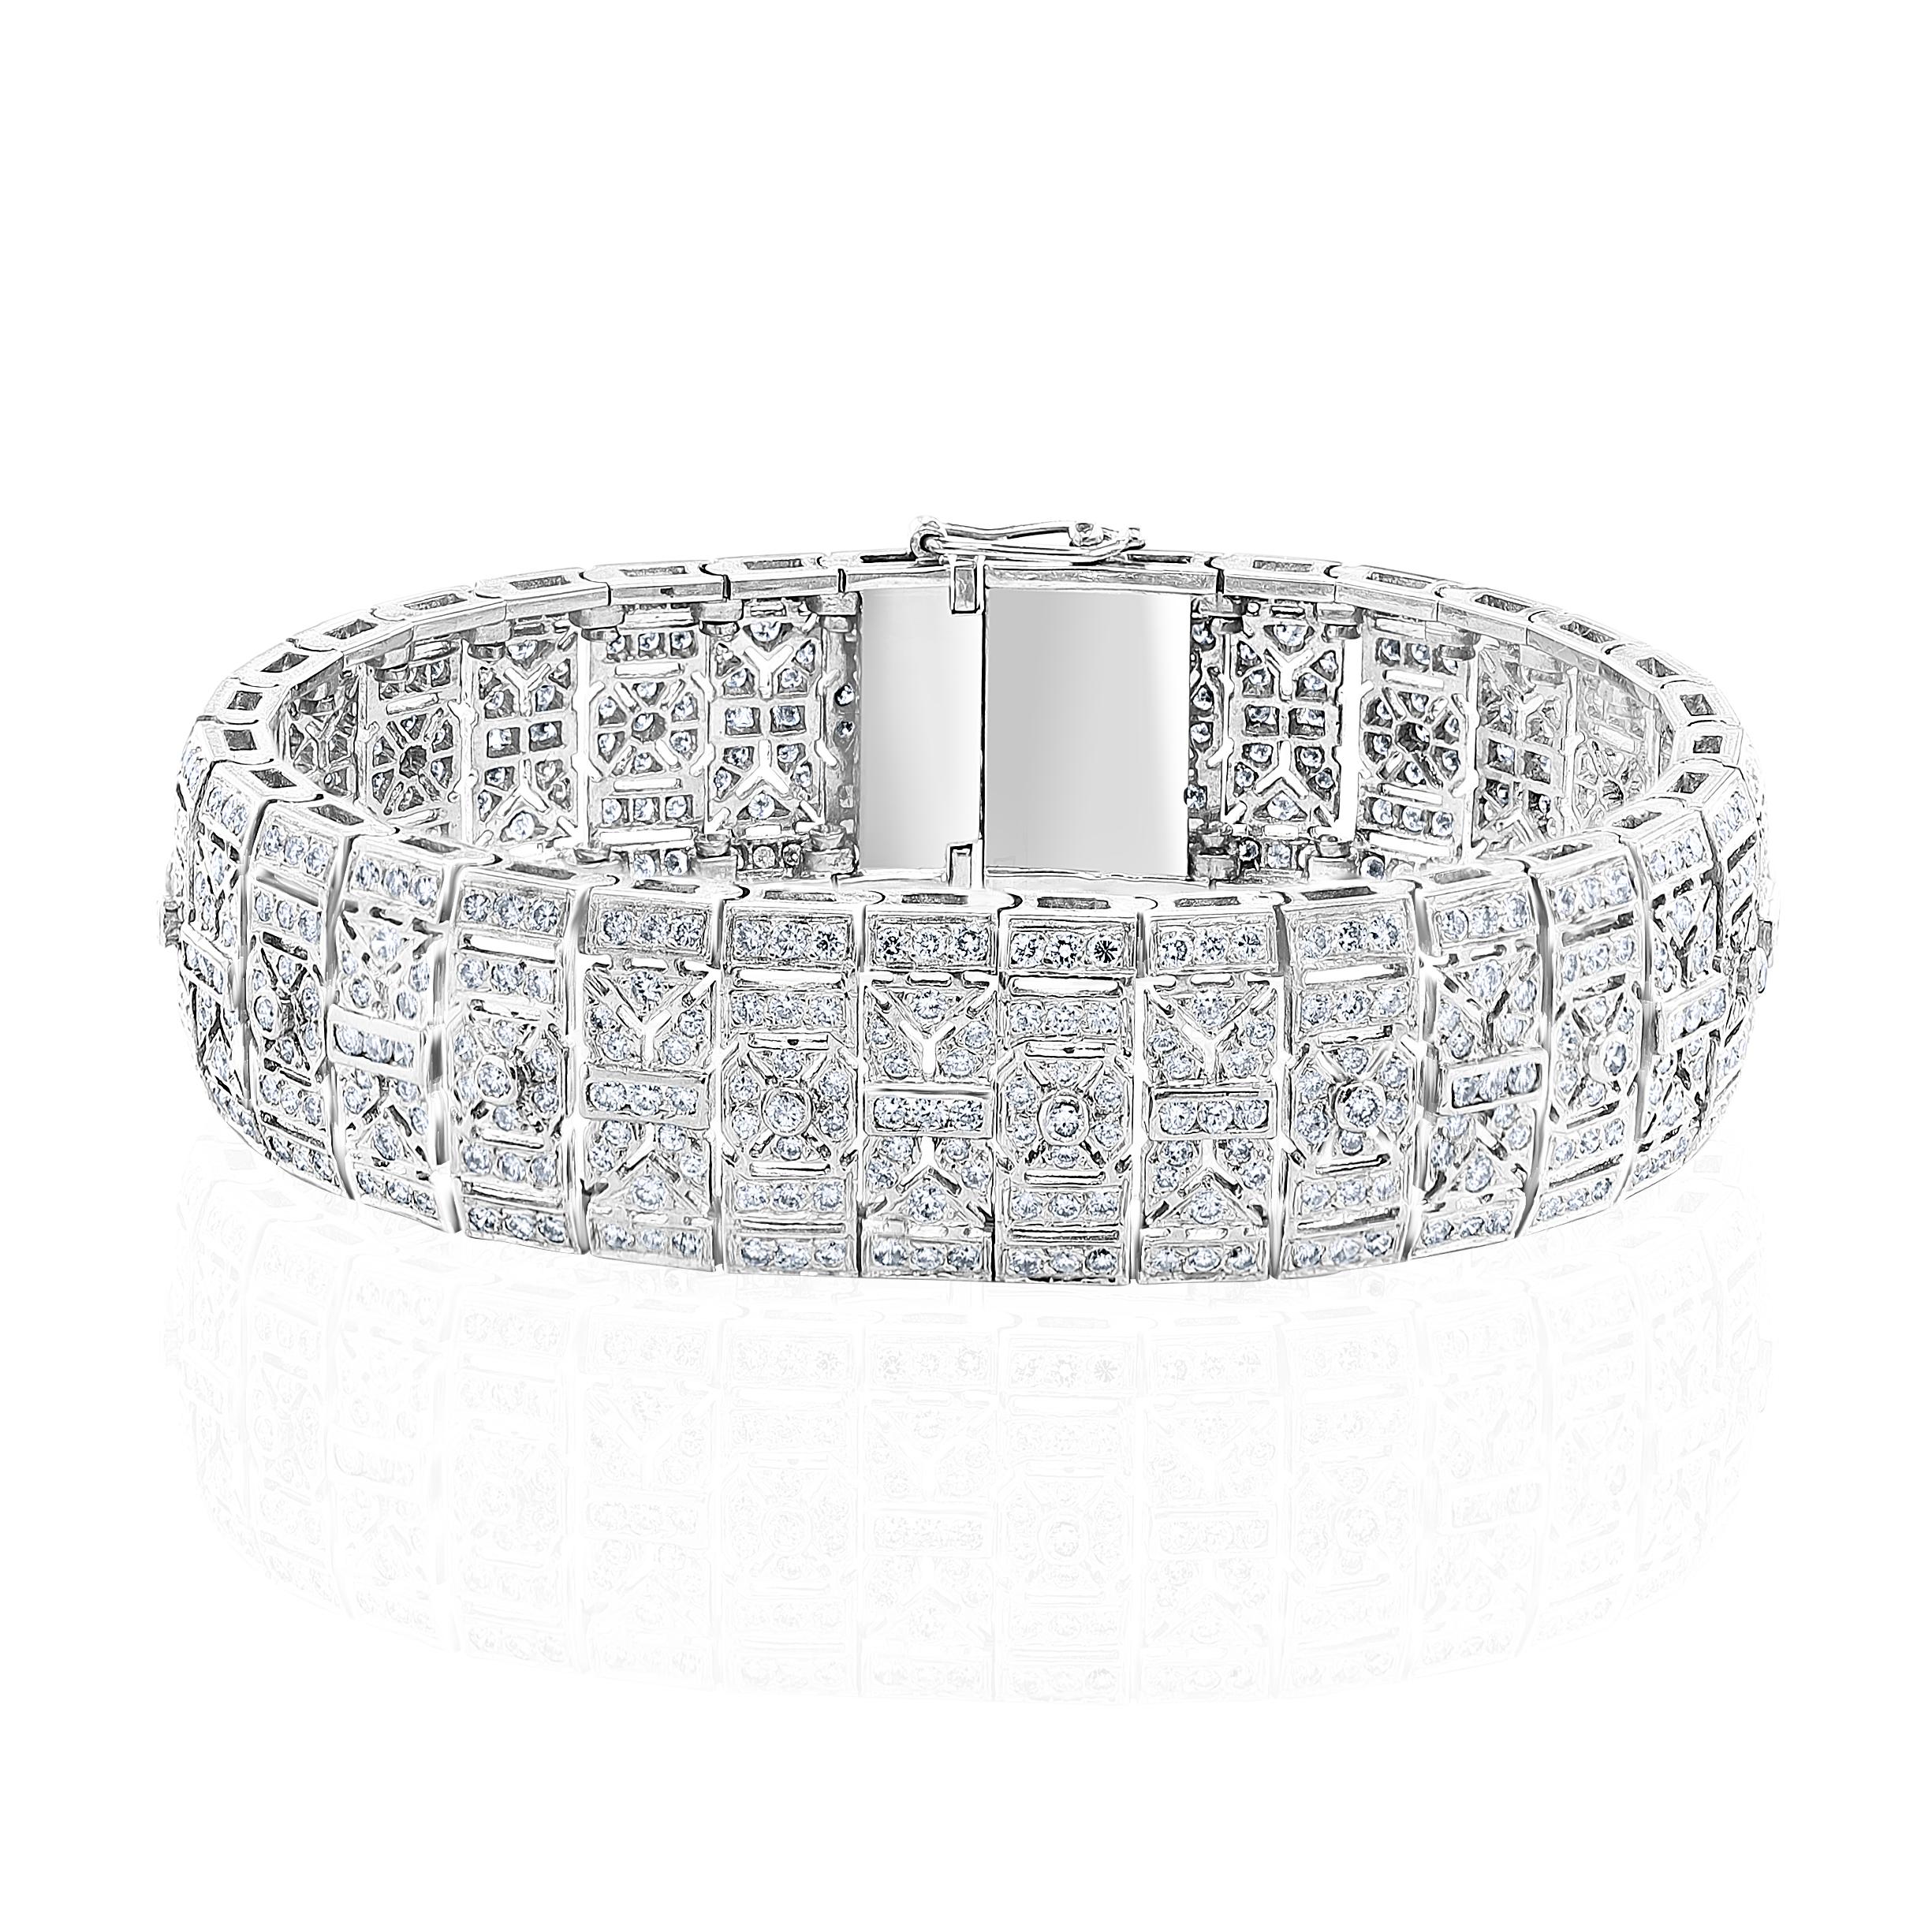 Diamond and White Gold Bracelet.
608 Round Diamonds weighing approximately 9.50 Carats.
5/8 inches in width.
7.25 inches.